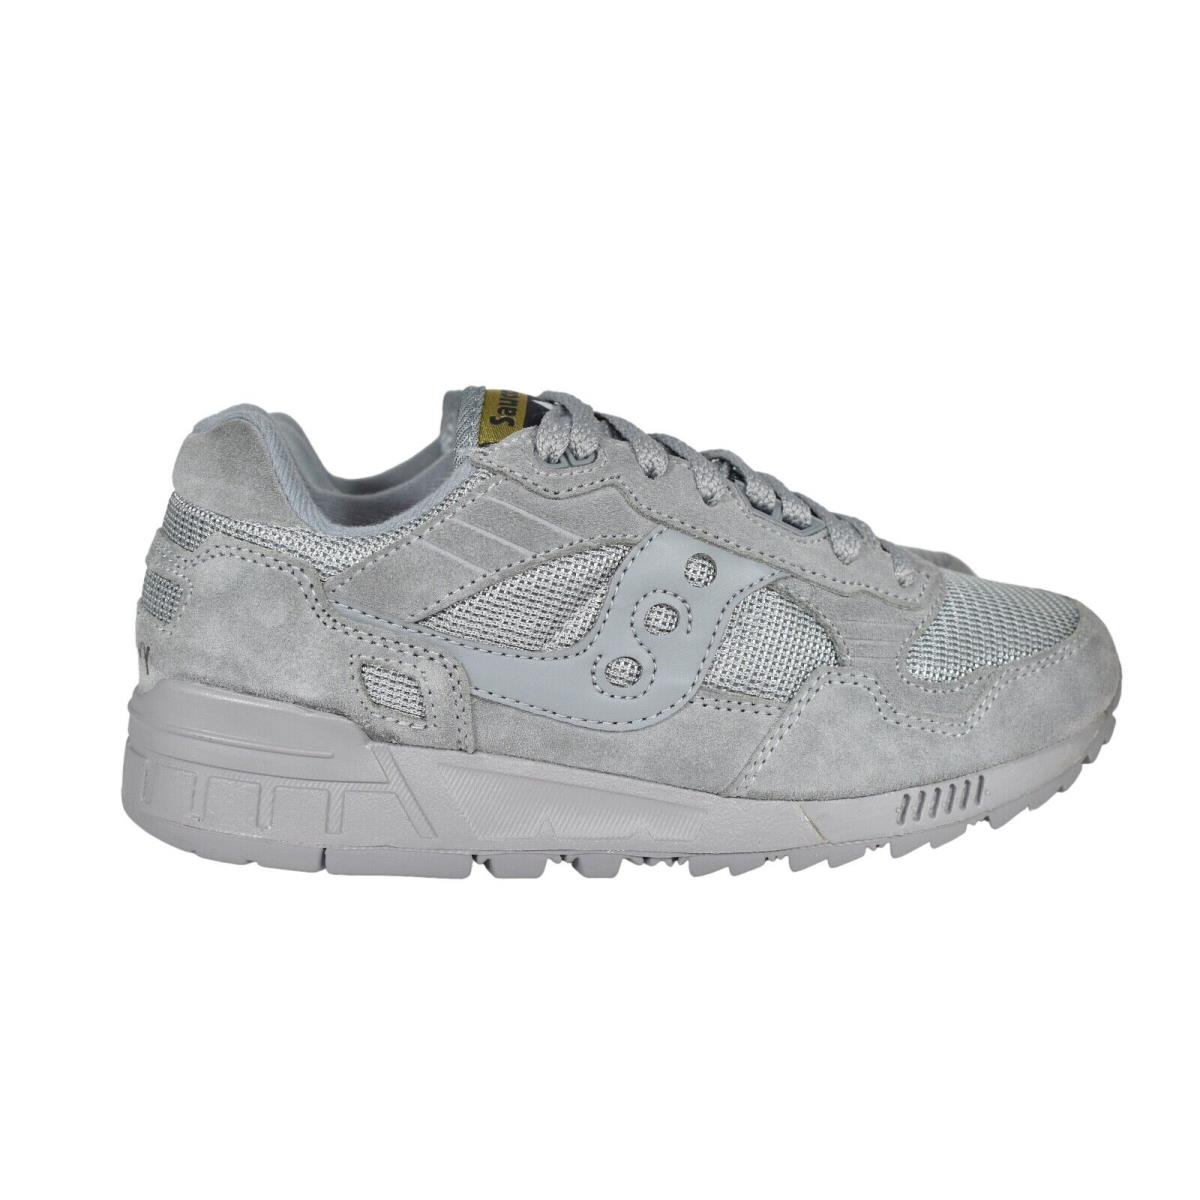 Saucony shoes Shadow - Gray 4